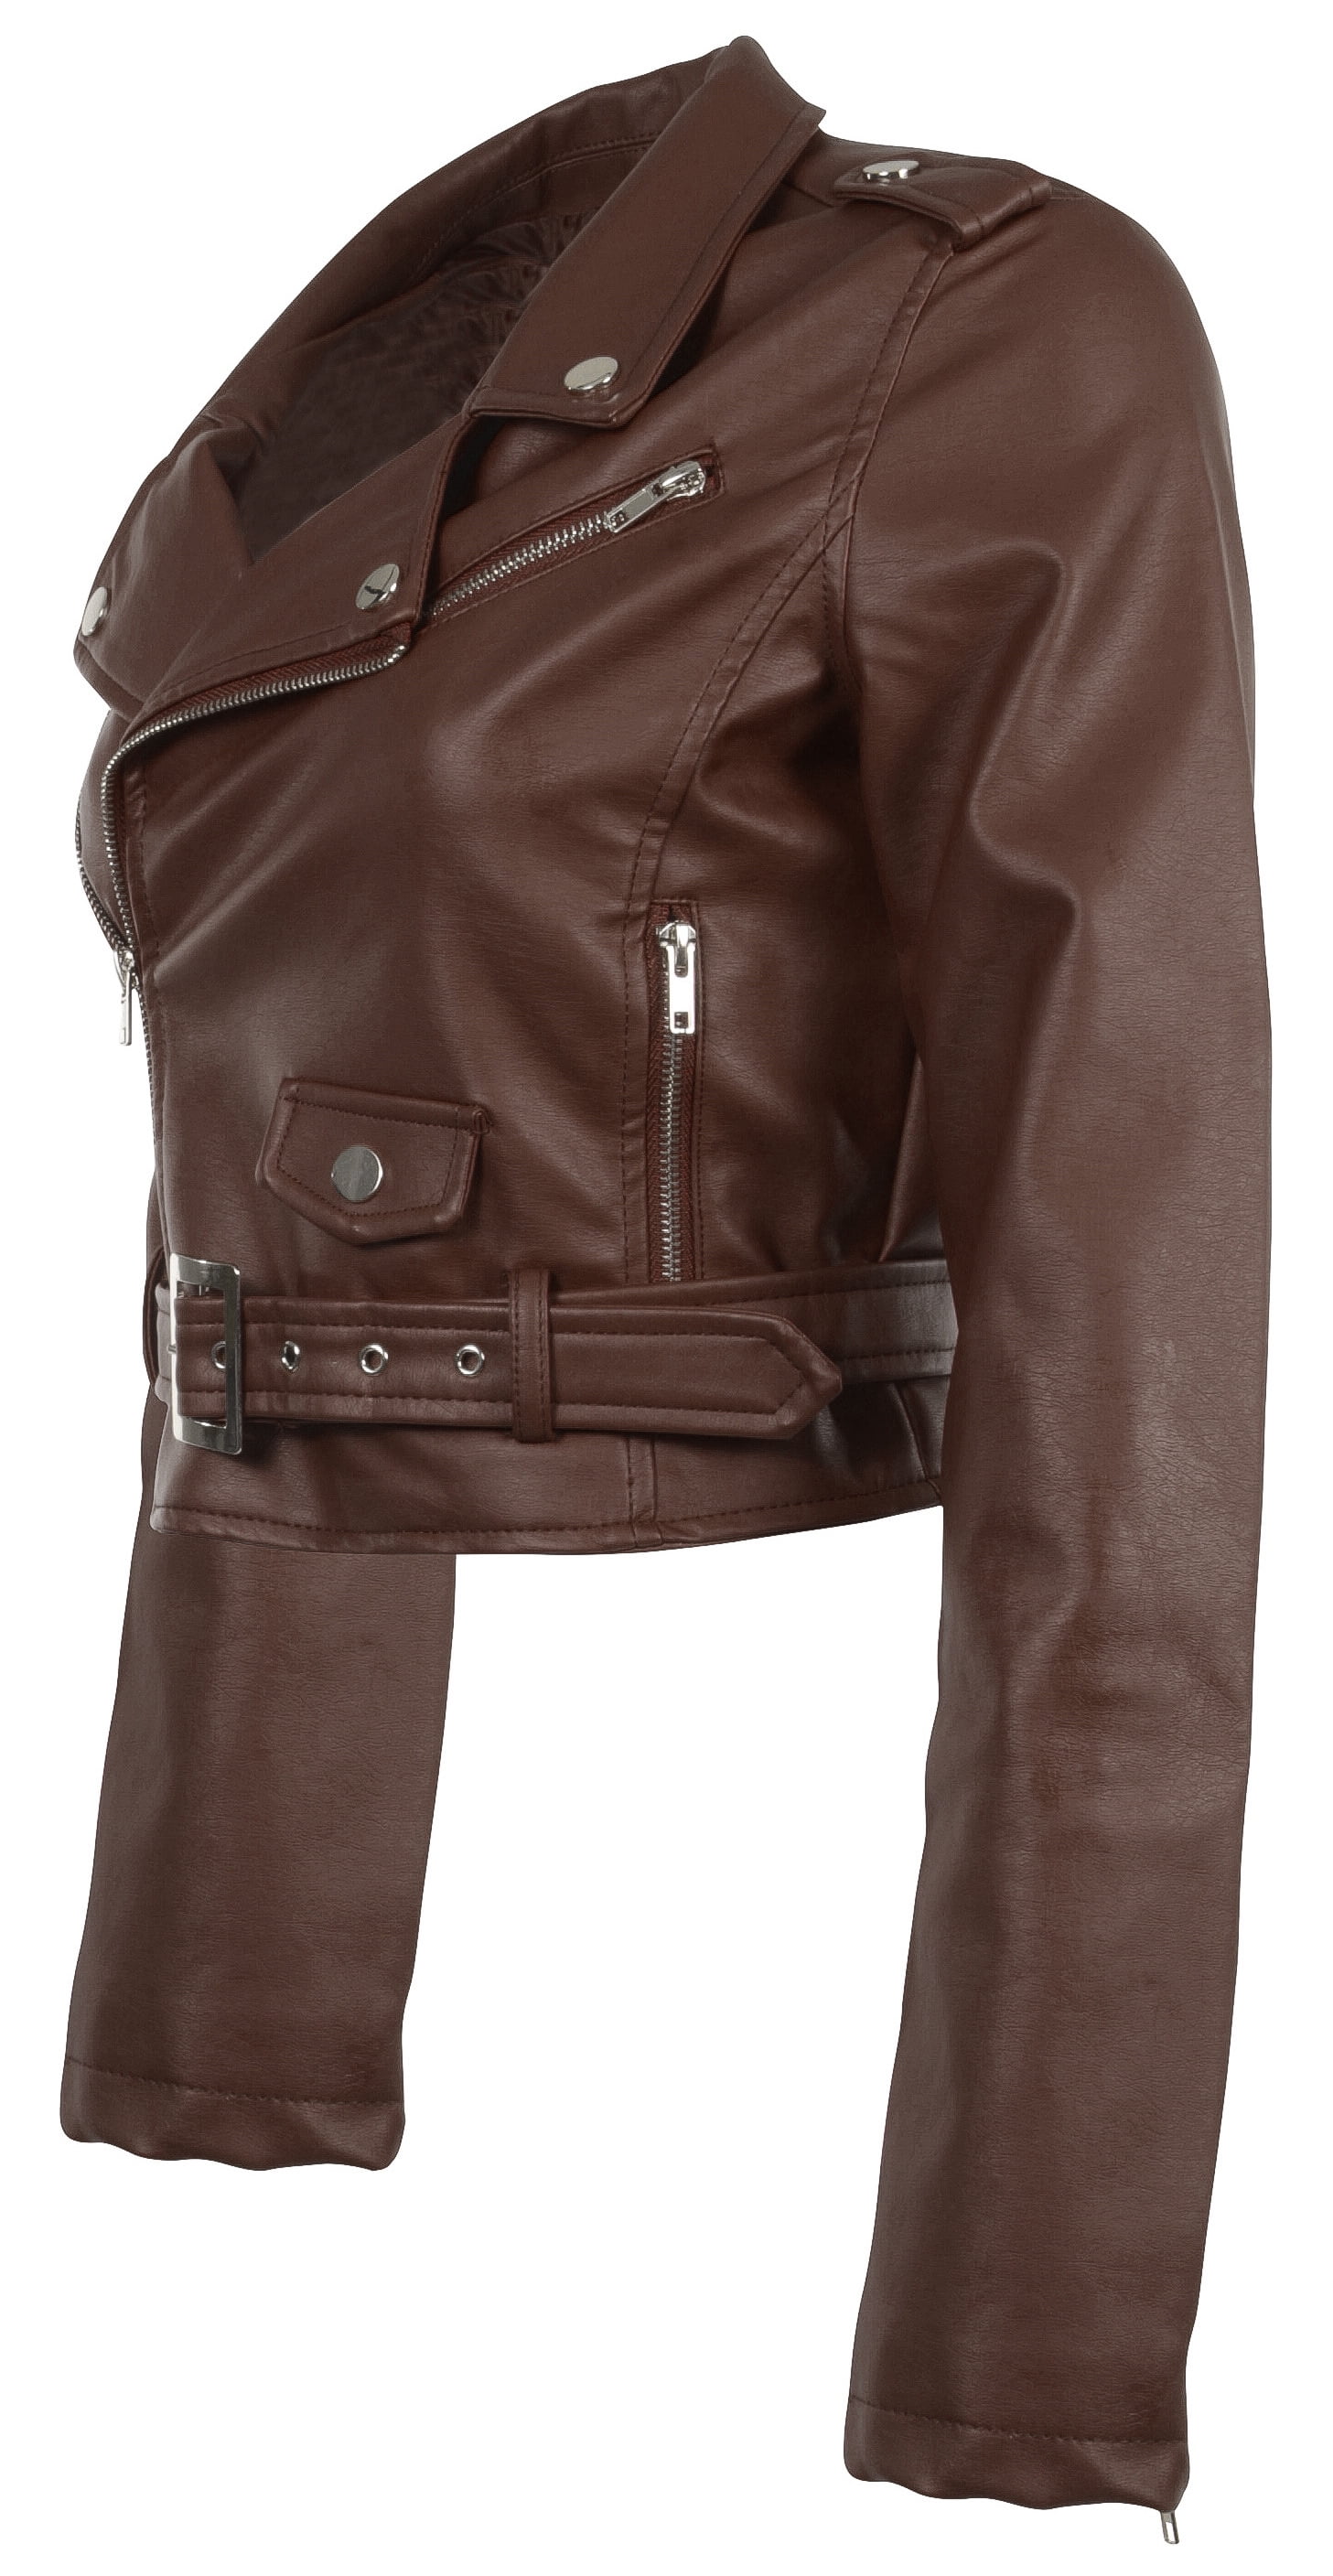 18 personalized leather playoff jackets for the ladies of the